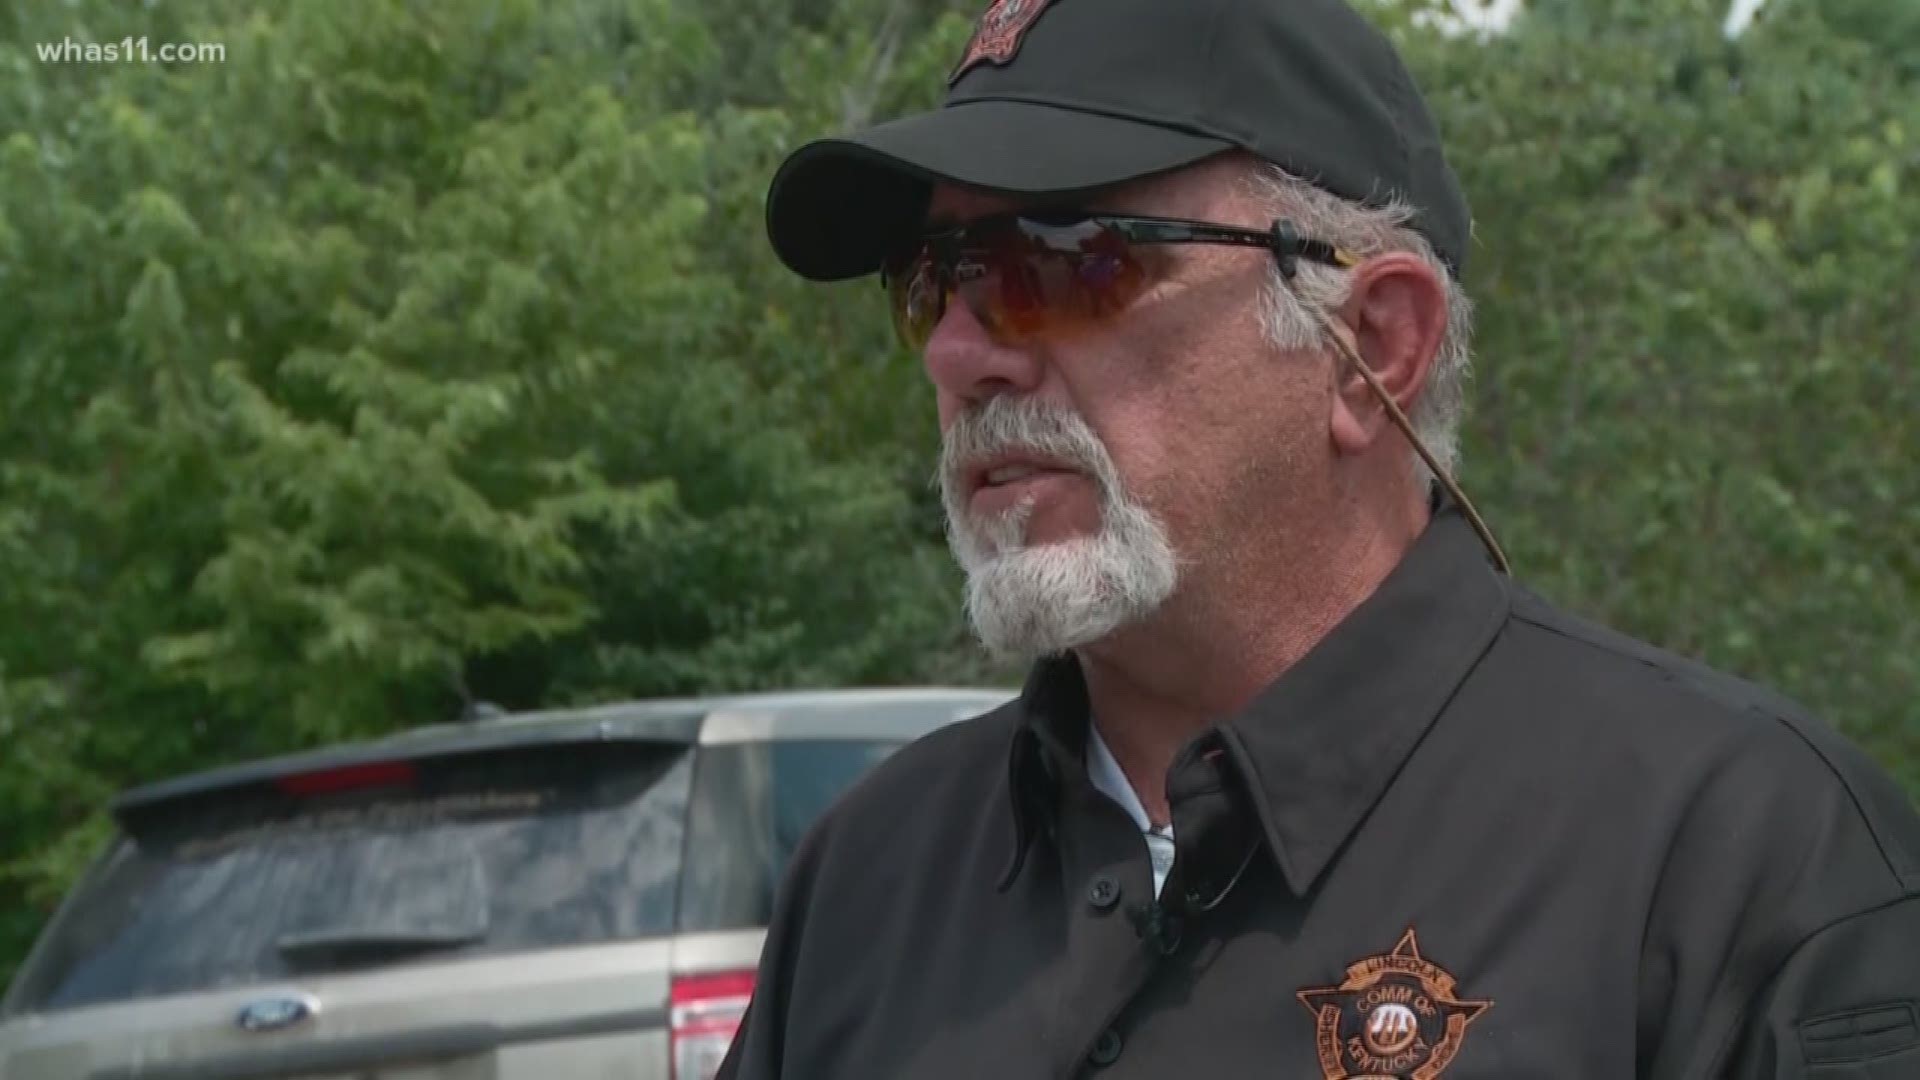 A Lincoln County deputy is being honored for his actions during the gas explosion that took a life and damaged multiple homes back in early August.